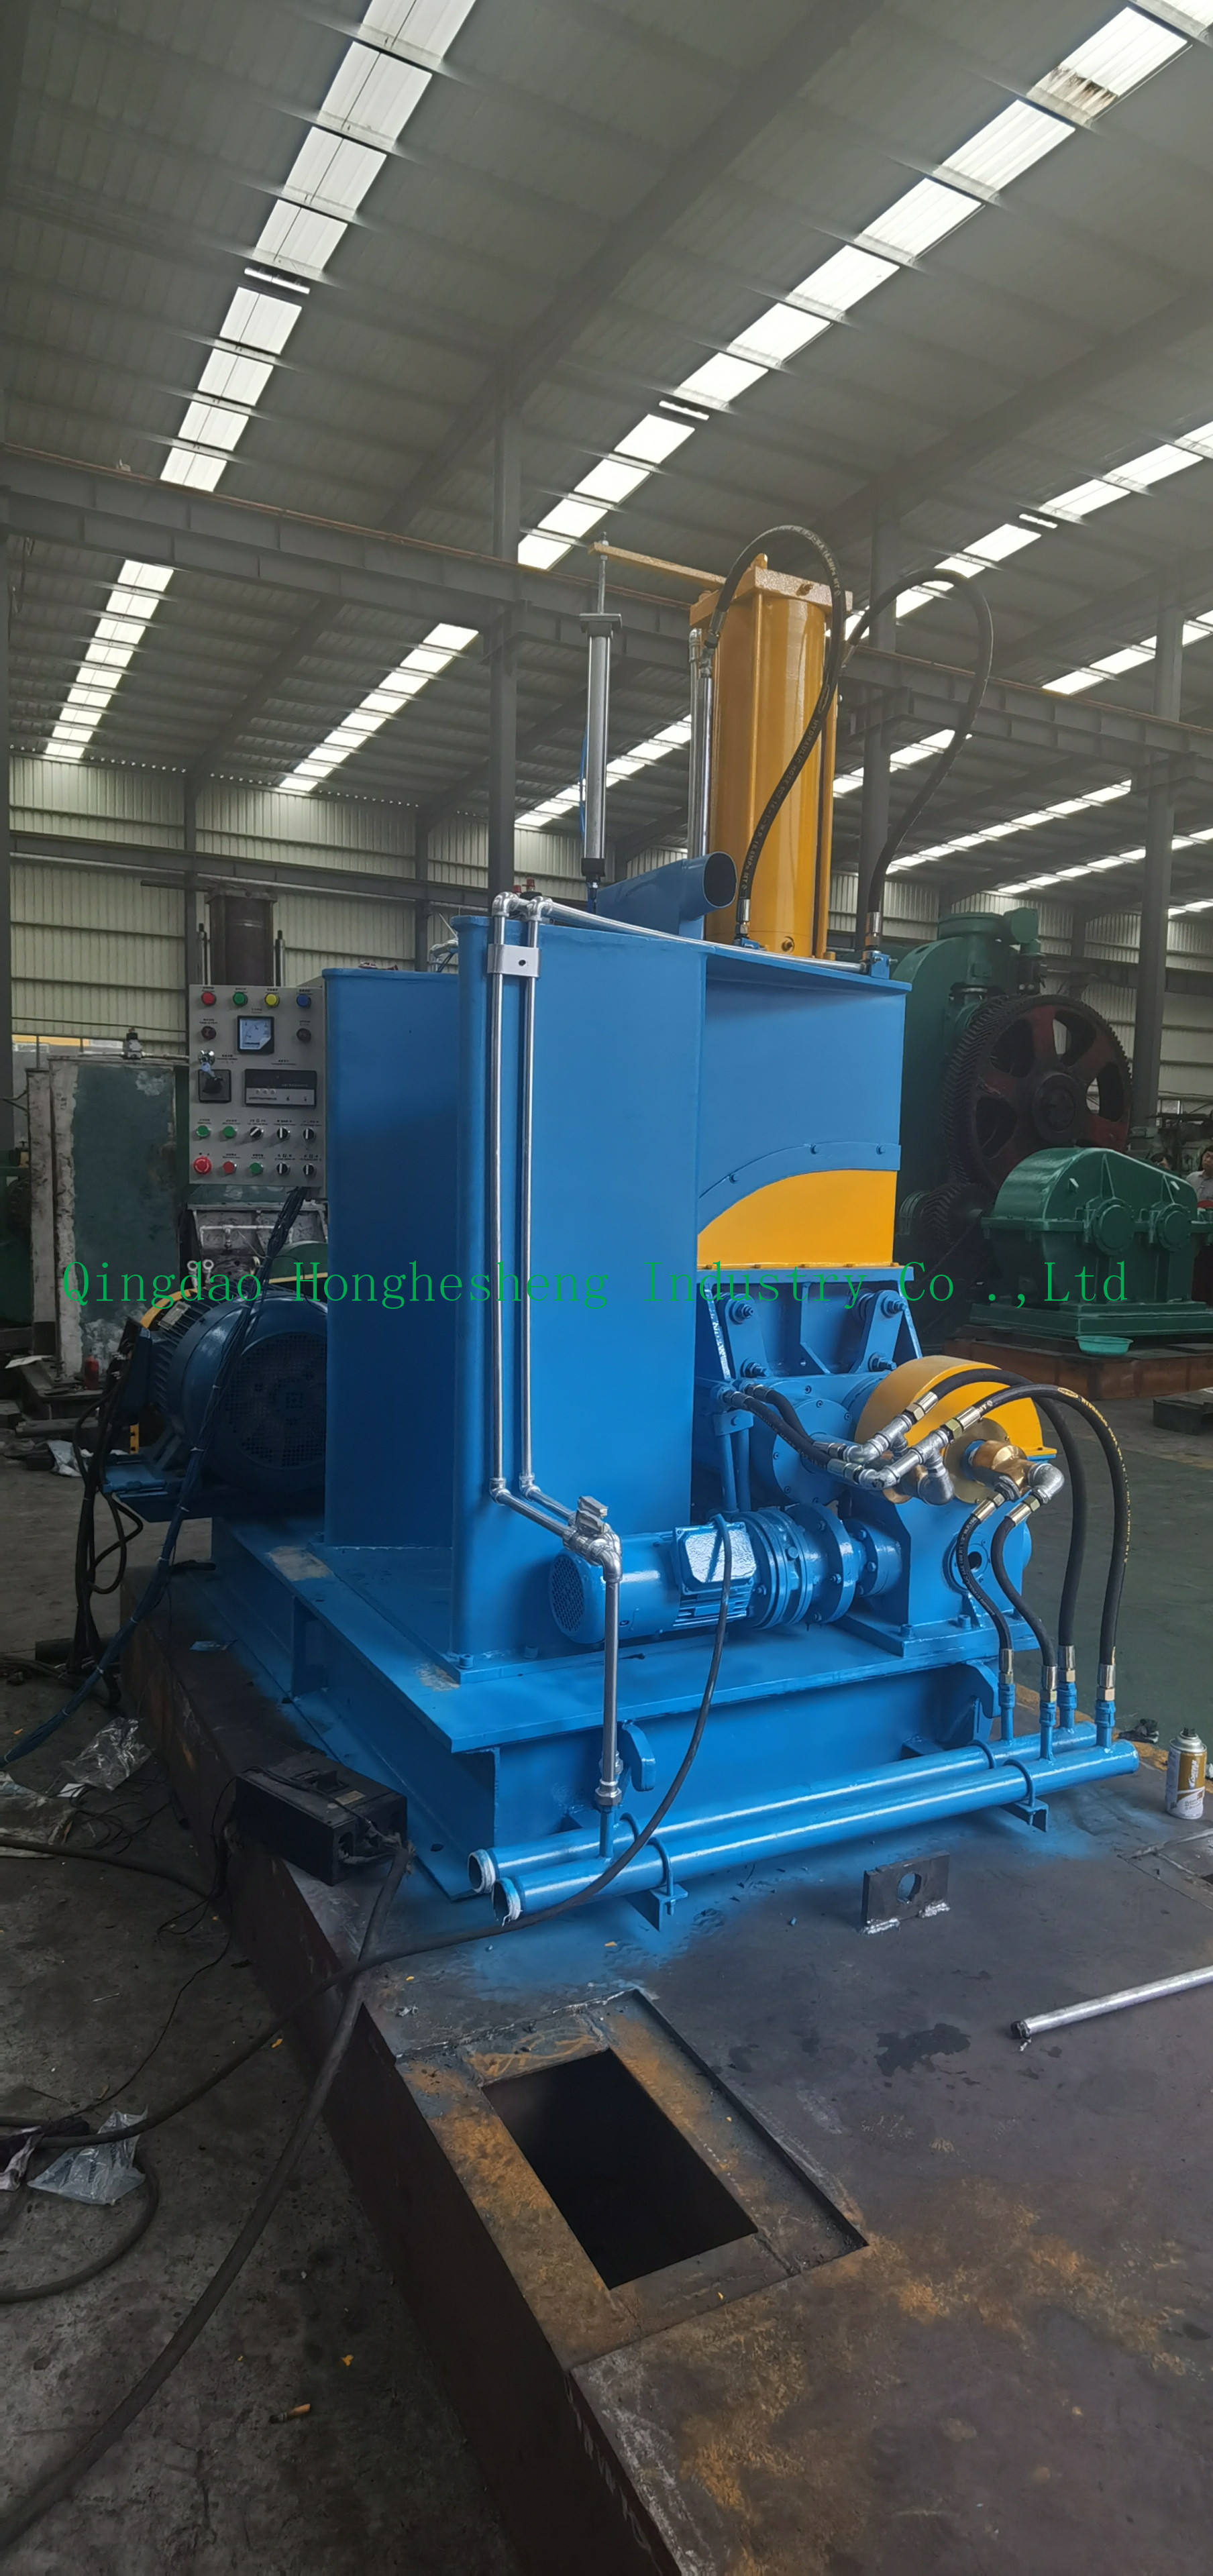 25L High Efficient CE Rubber Plastic Dispersion kneader machine with PLC Control Water Cooling